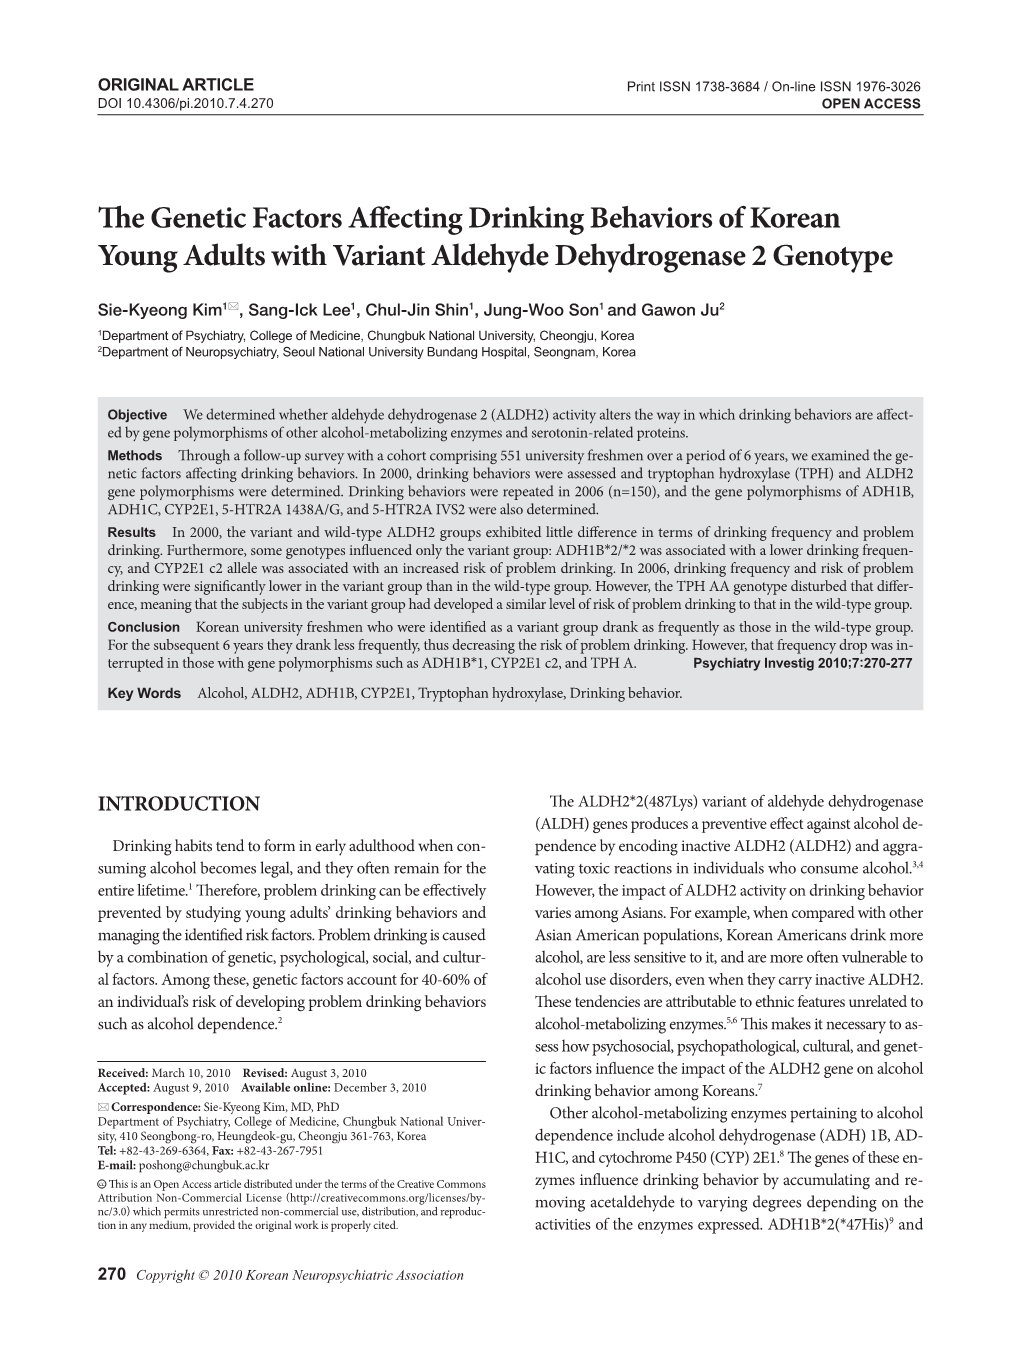 The Genetic Factors Affecting Drinking Behaviors of Korean Young Adults with Variant Aldehyde Dehydrogenase 2 Genotype